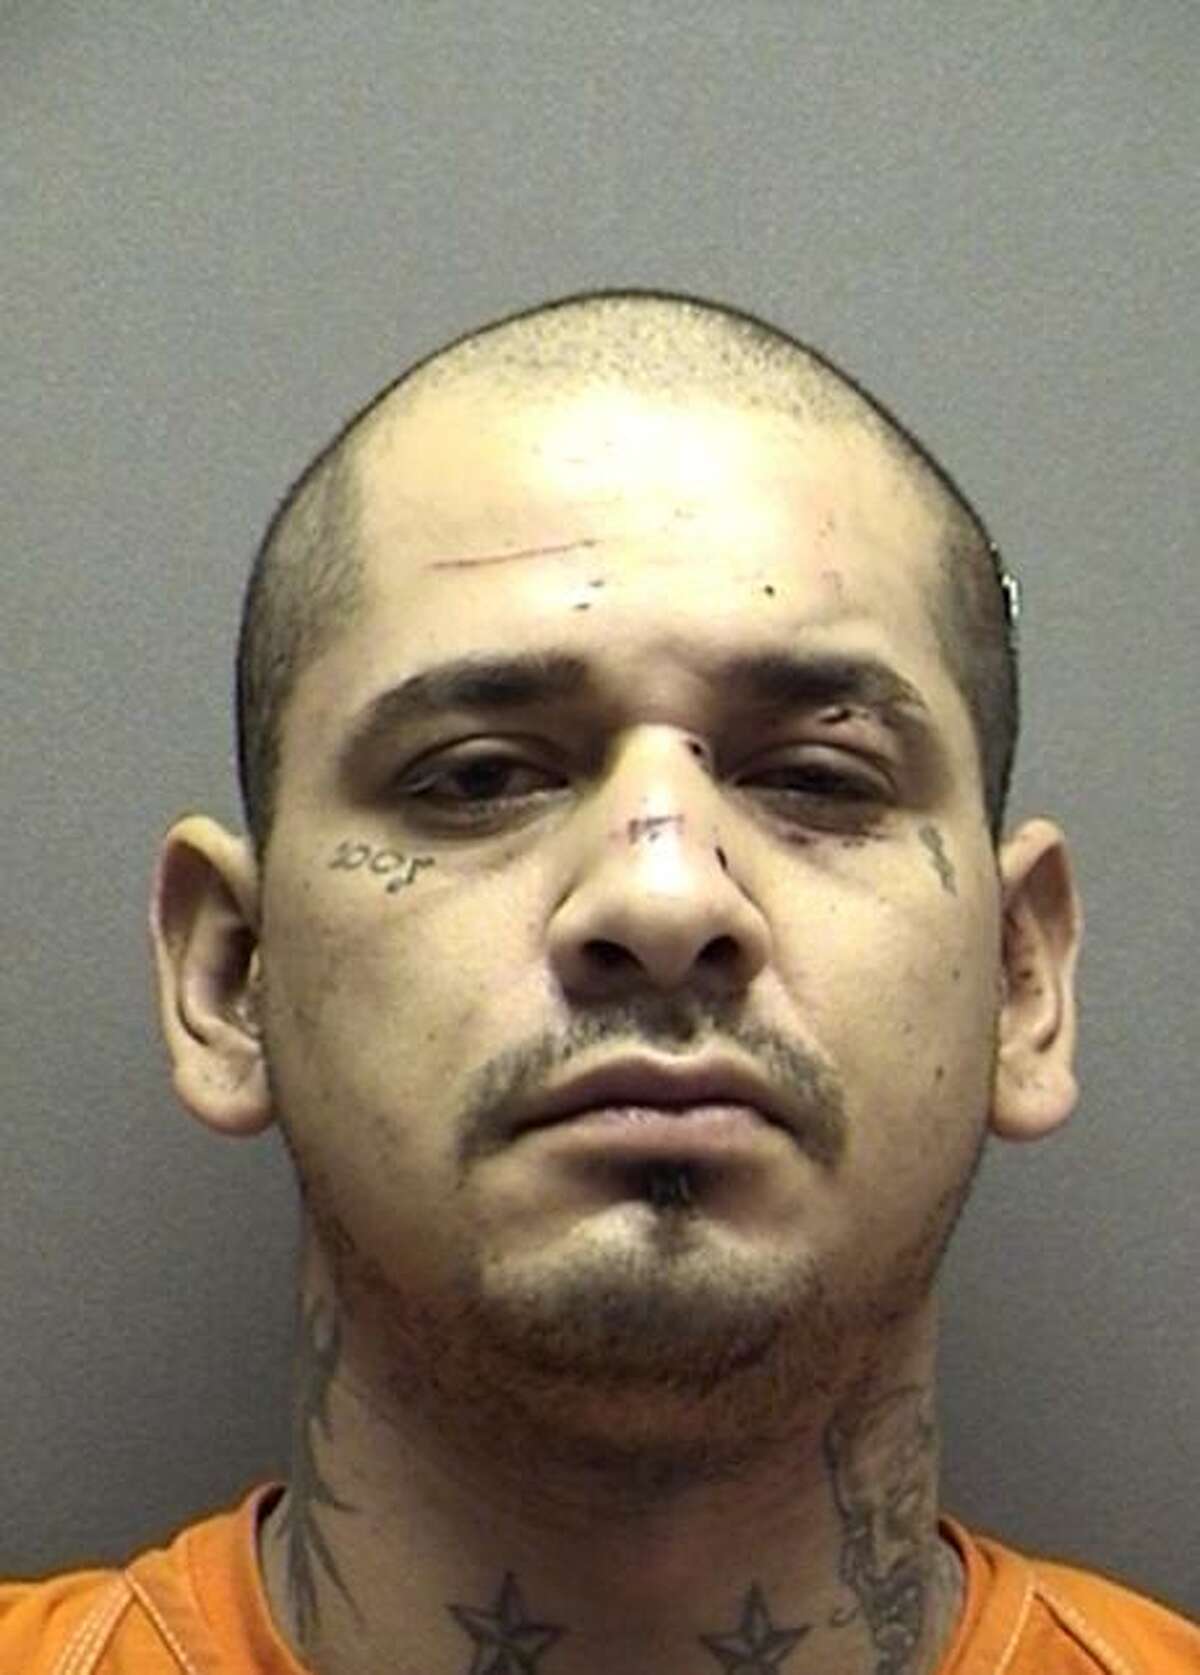 Shaun Ruiz Puente, 32, was arrested on Sunday, Dec. 8, 2013, in Wilson County following a three county chase that including the shooting of SAPD Officer Robert Deckard, 31, who was critically injured and taken to San Antonio Military Medical Center. Puente, along with Jenevieve Ramos, 28, who was also arrested in the case, are suspected in a string of robberies in San Antonio. She was charged with aggravated assault of a peace officer.